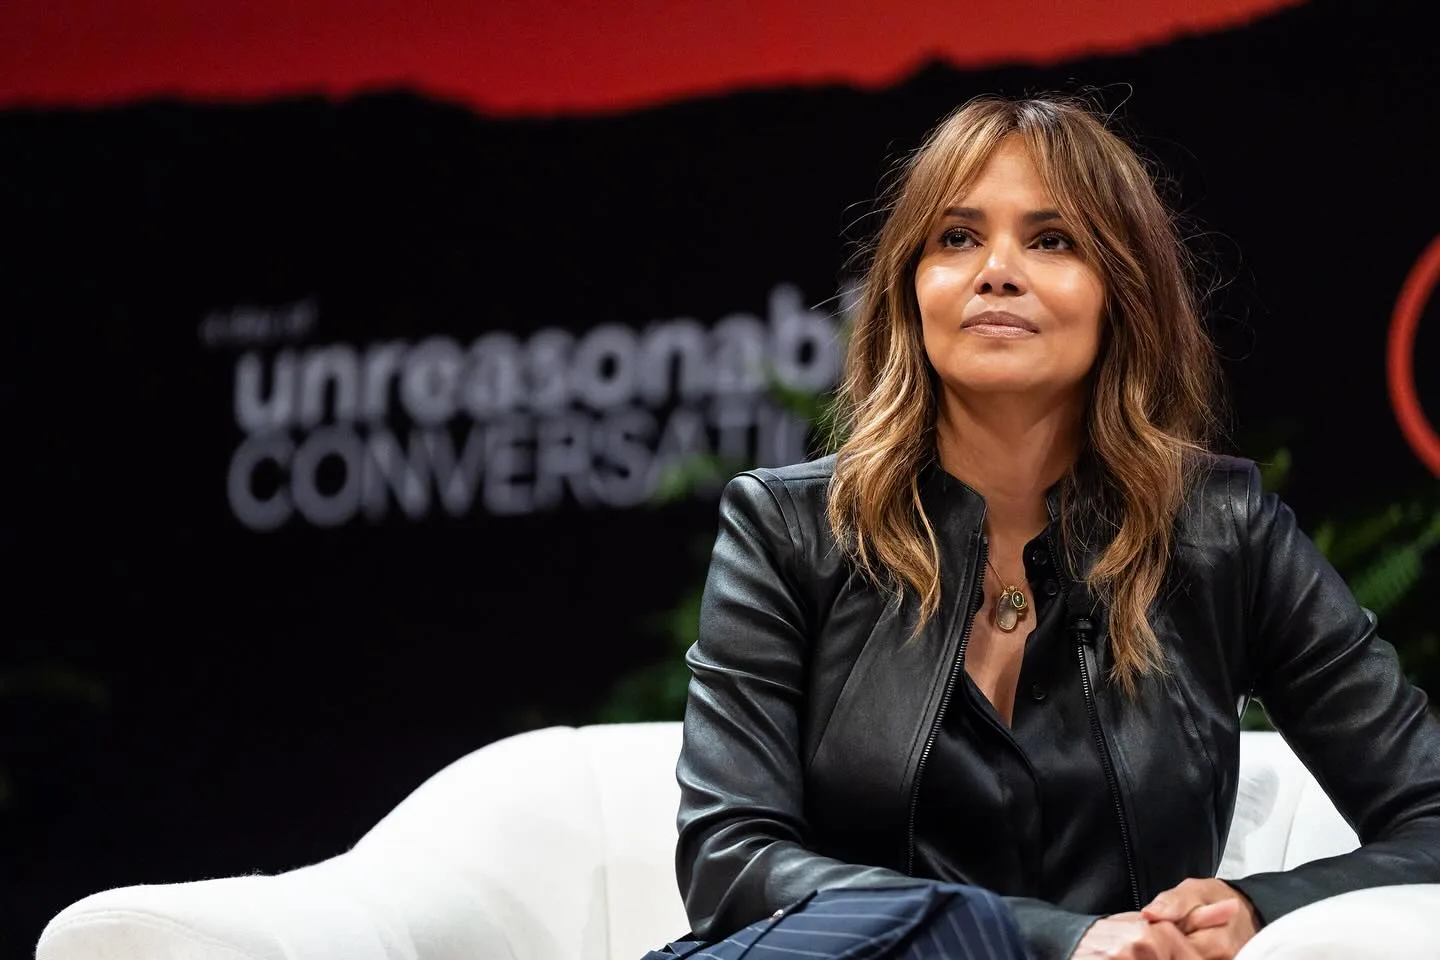 Halle Berry: My Perimenopause Was Misdiagnosed As Herpes